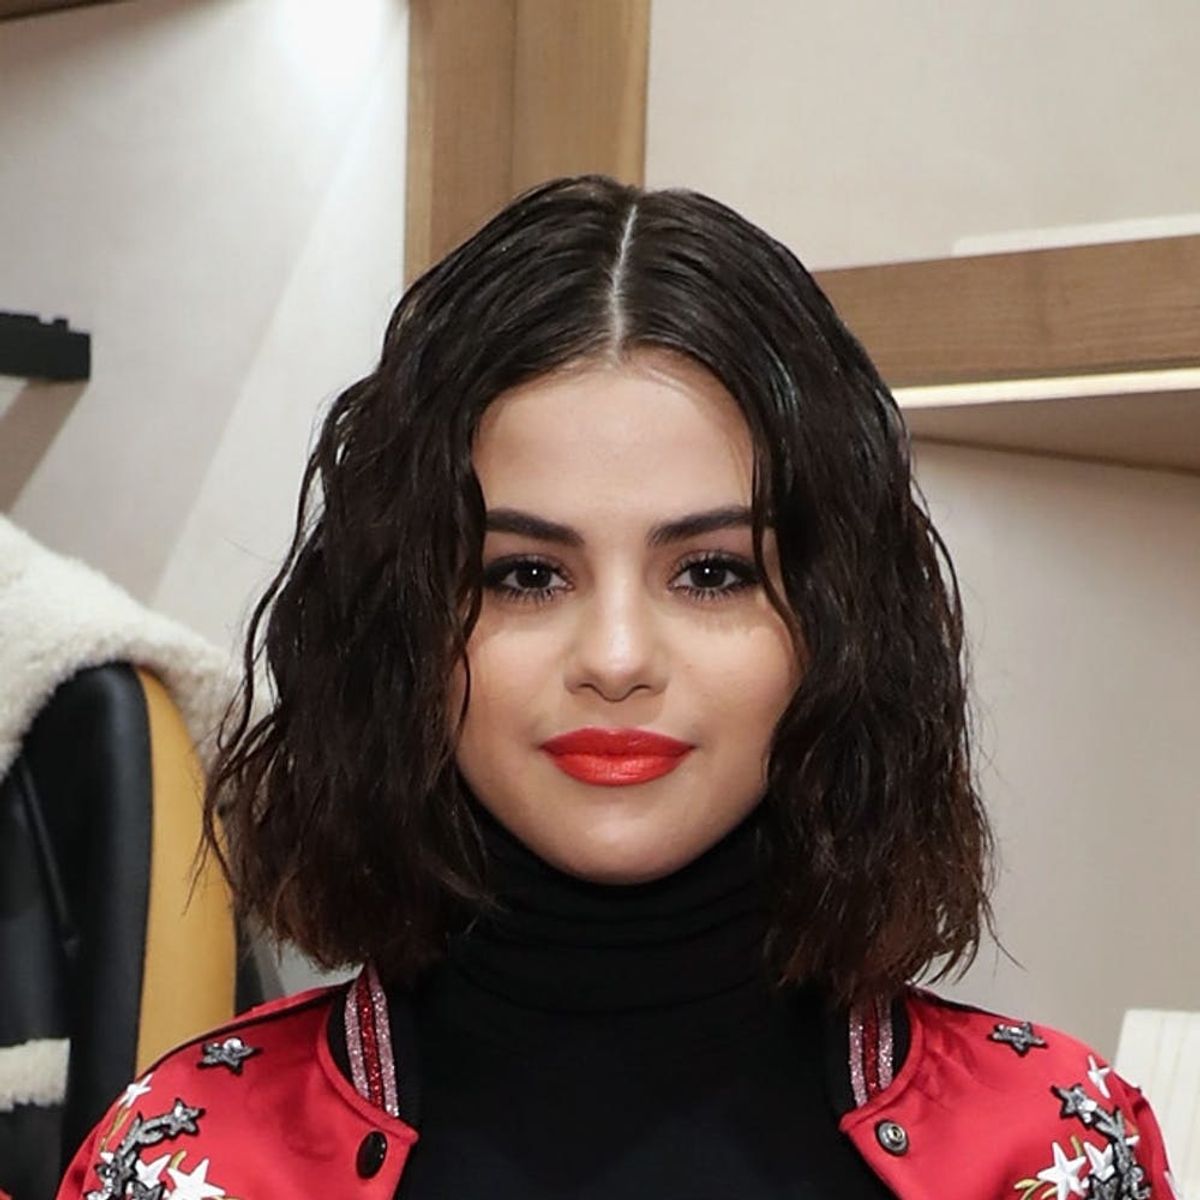 Selena Gomez Just Surprised Fans With PLATINUM Locks on the 2017 AMAs Red Carpet